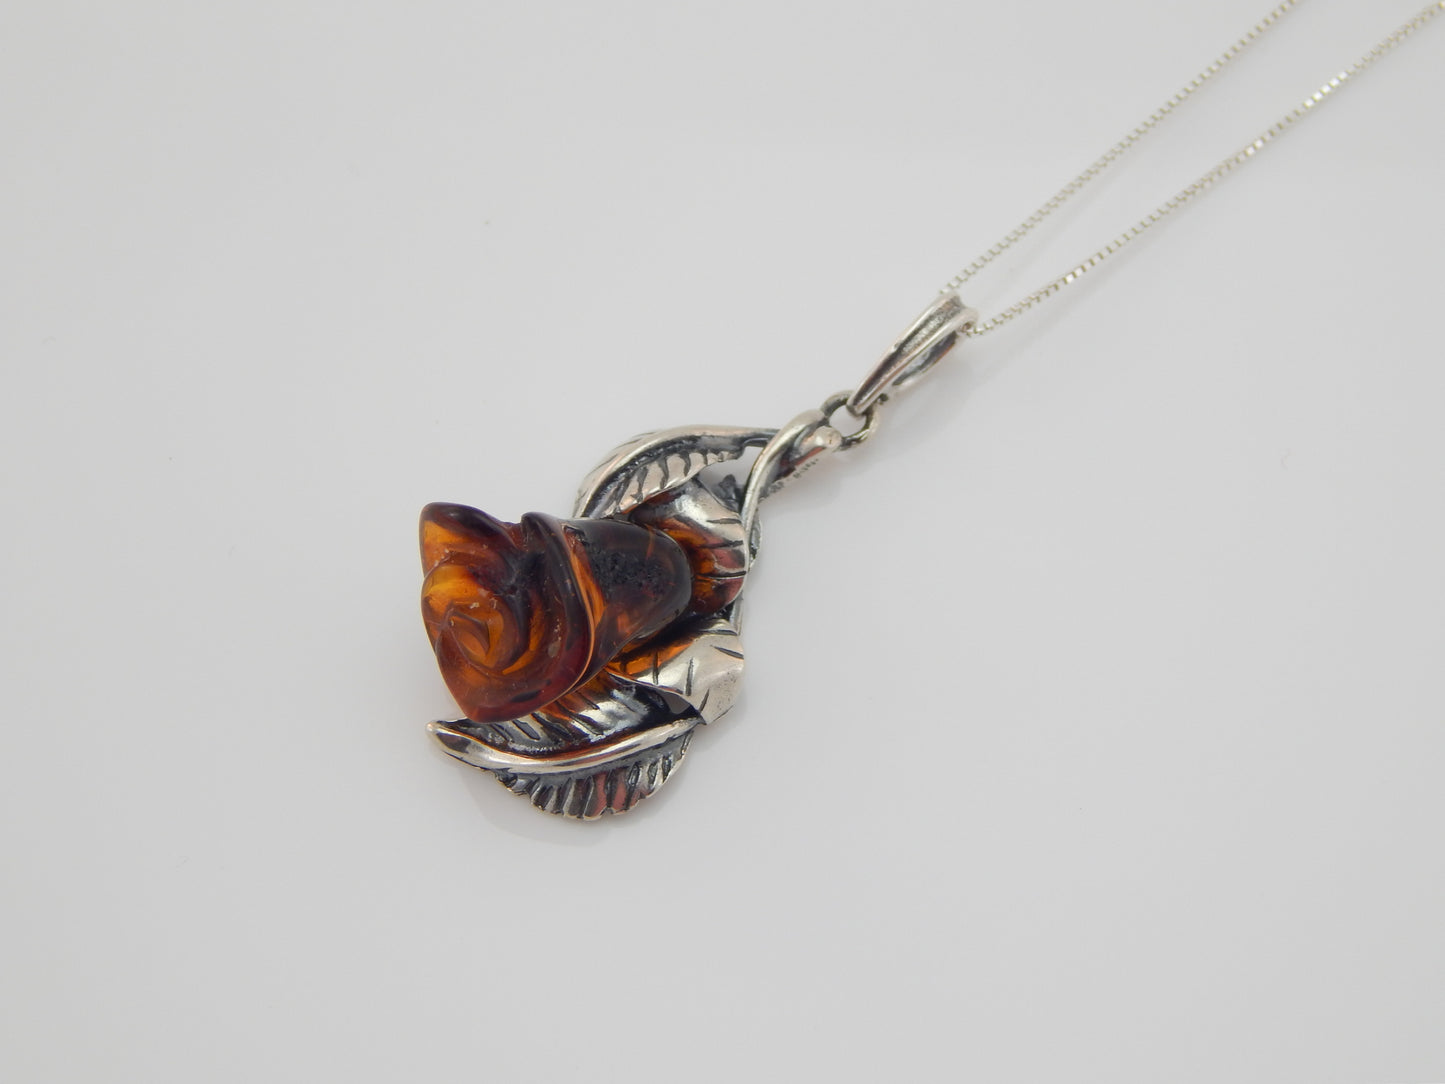 Natural Baltic Dark Cognac Amber Handmade Rose Pendant Necklace in 925 Sterling Silver